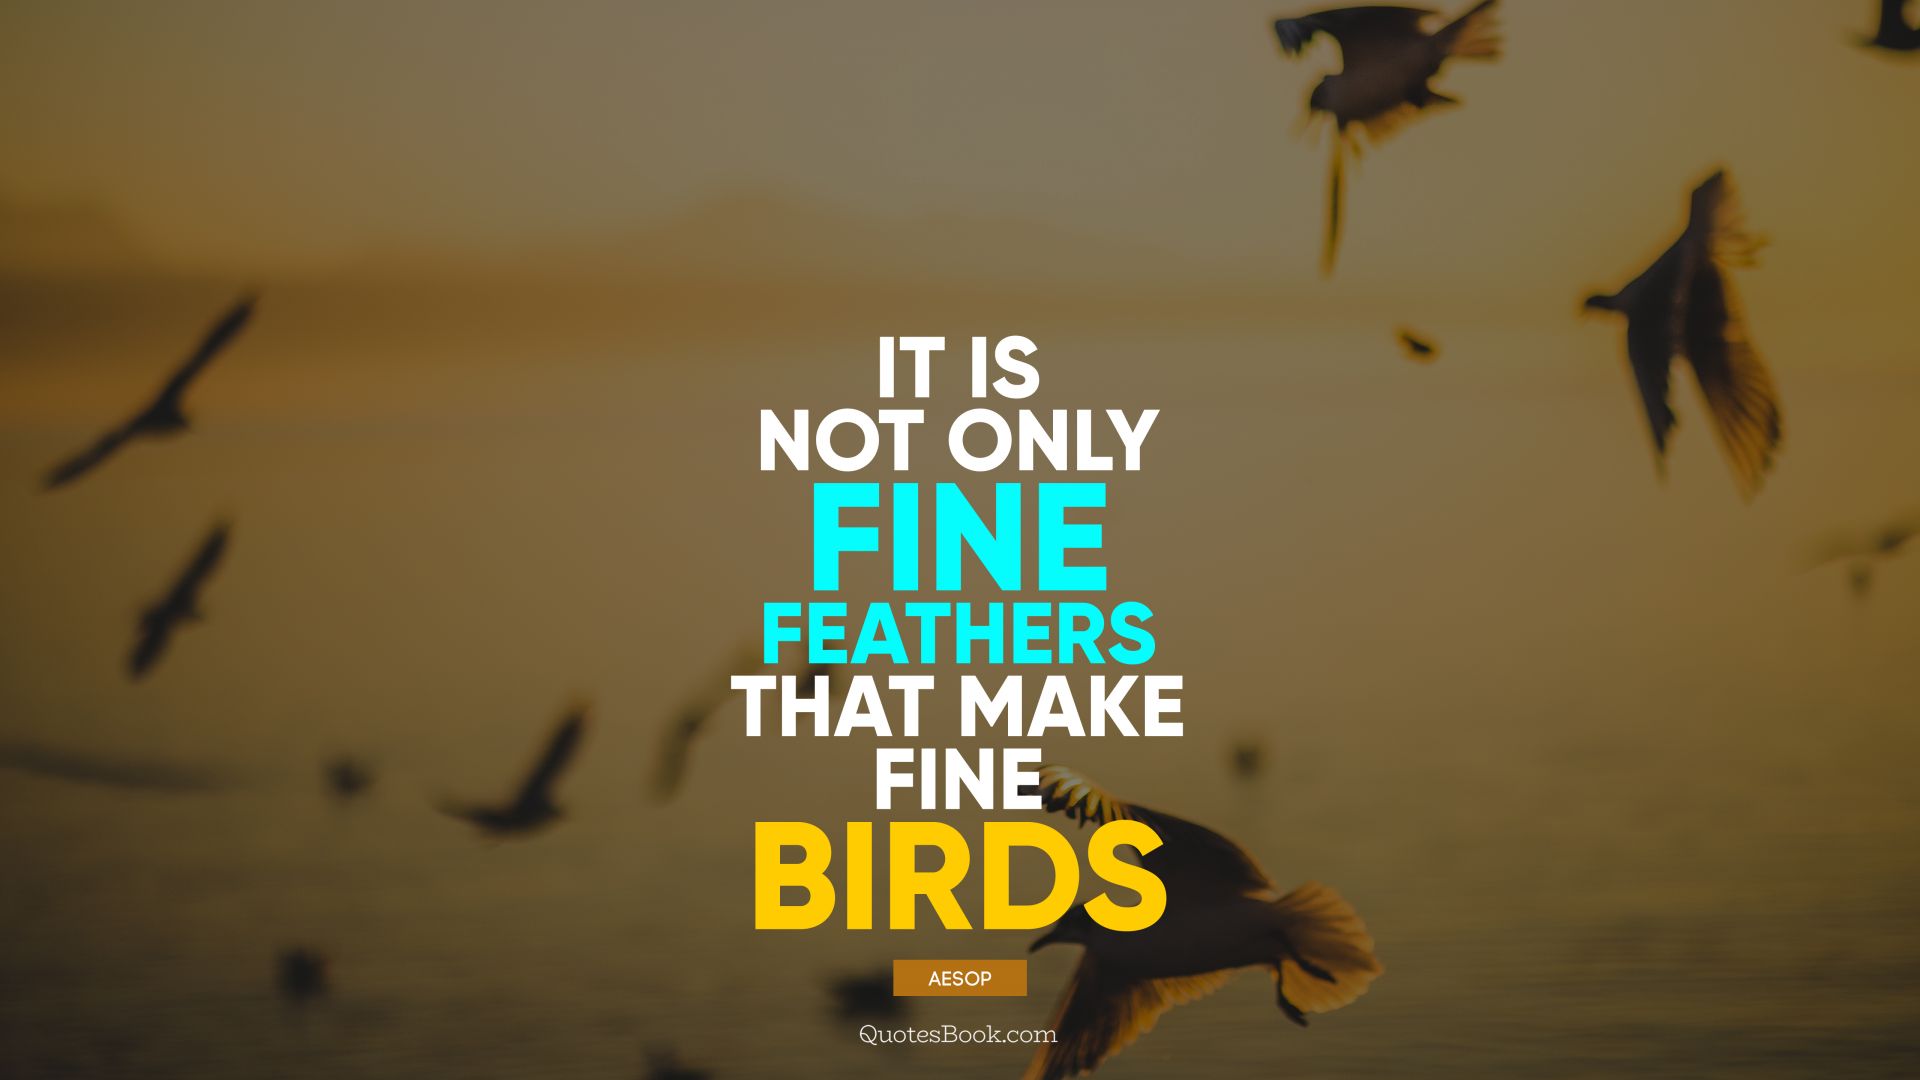 It is not only fine feathers that make fine birds. - Quote by Aesop